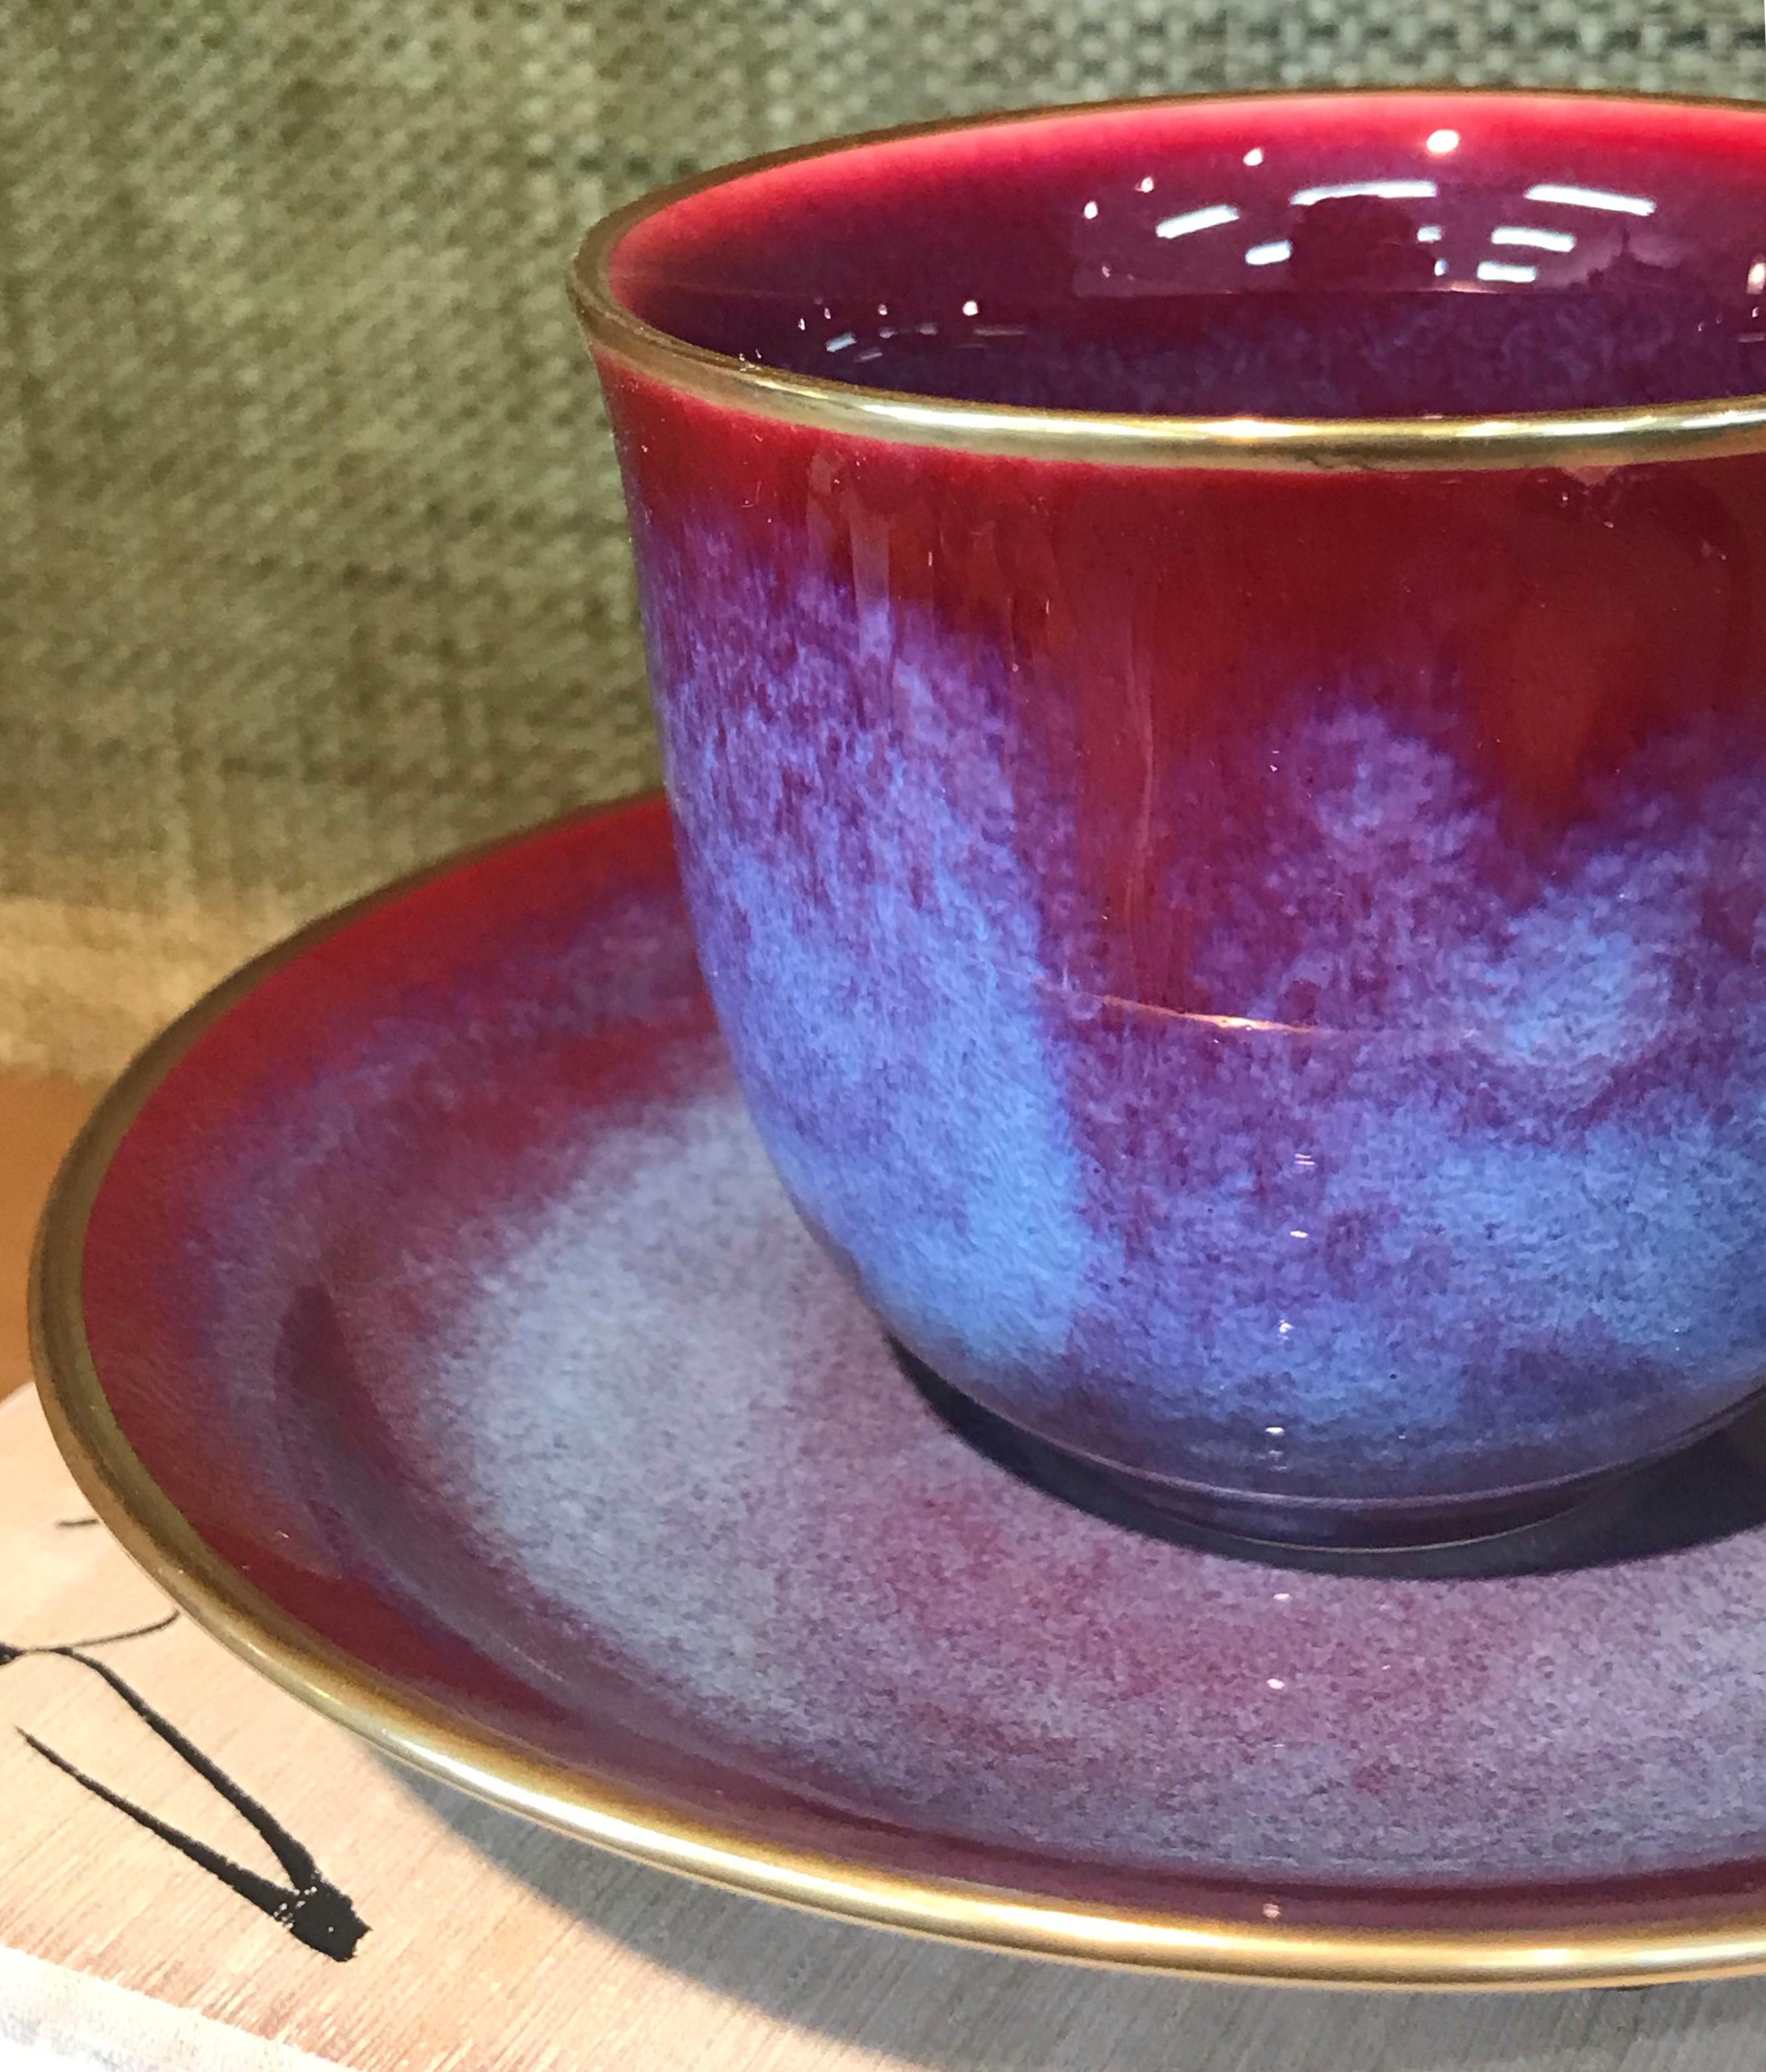 Gilt Japanese Hand-Glazed Red Porcelain Cup and Saucer by Contemporary Master Artist